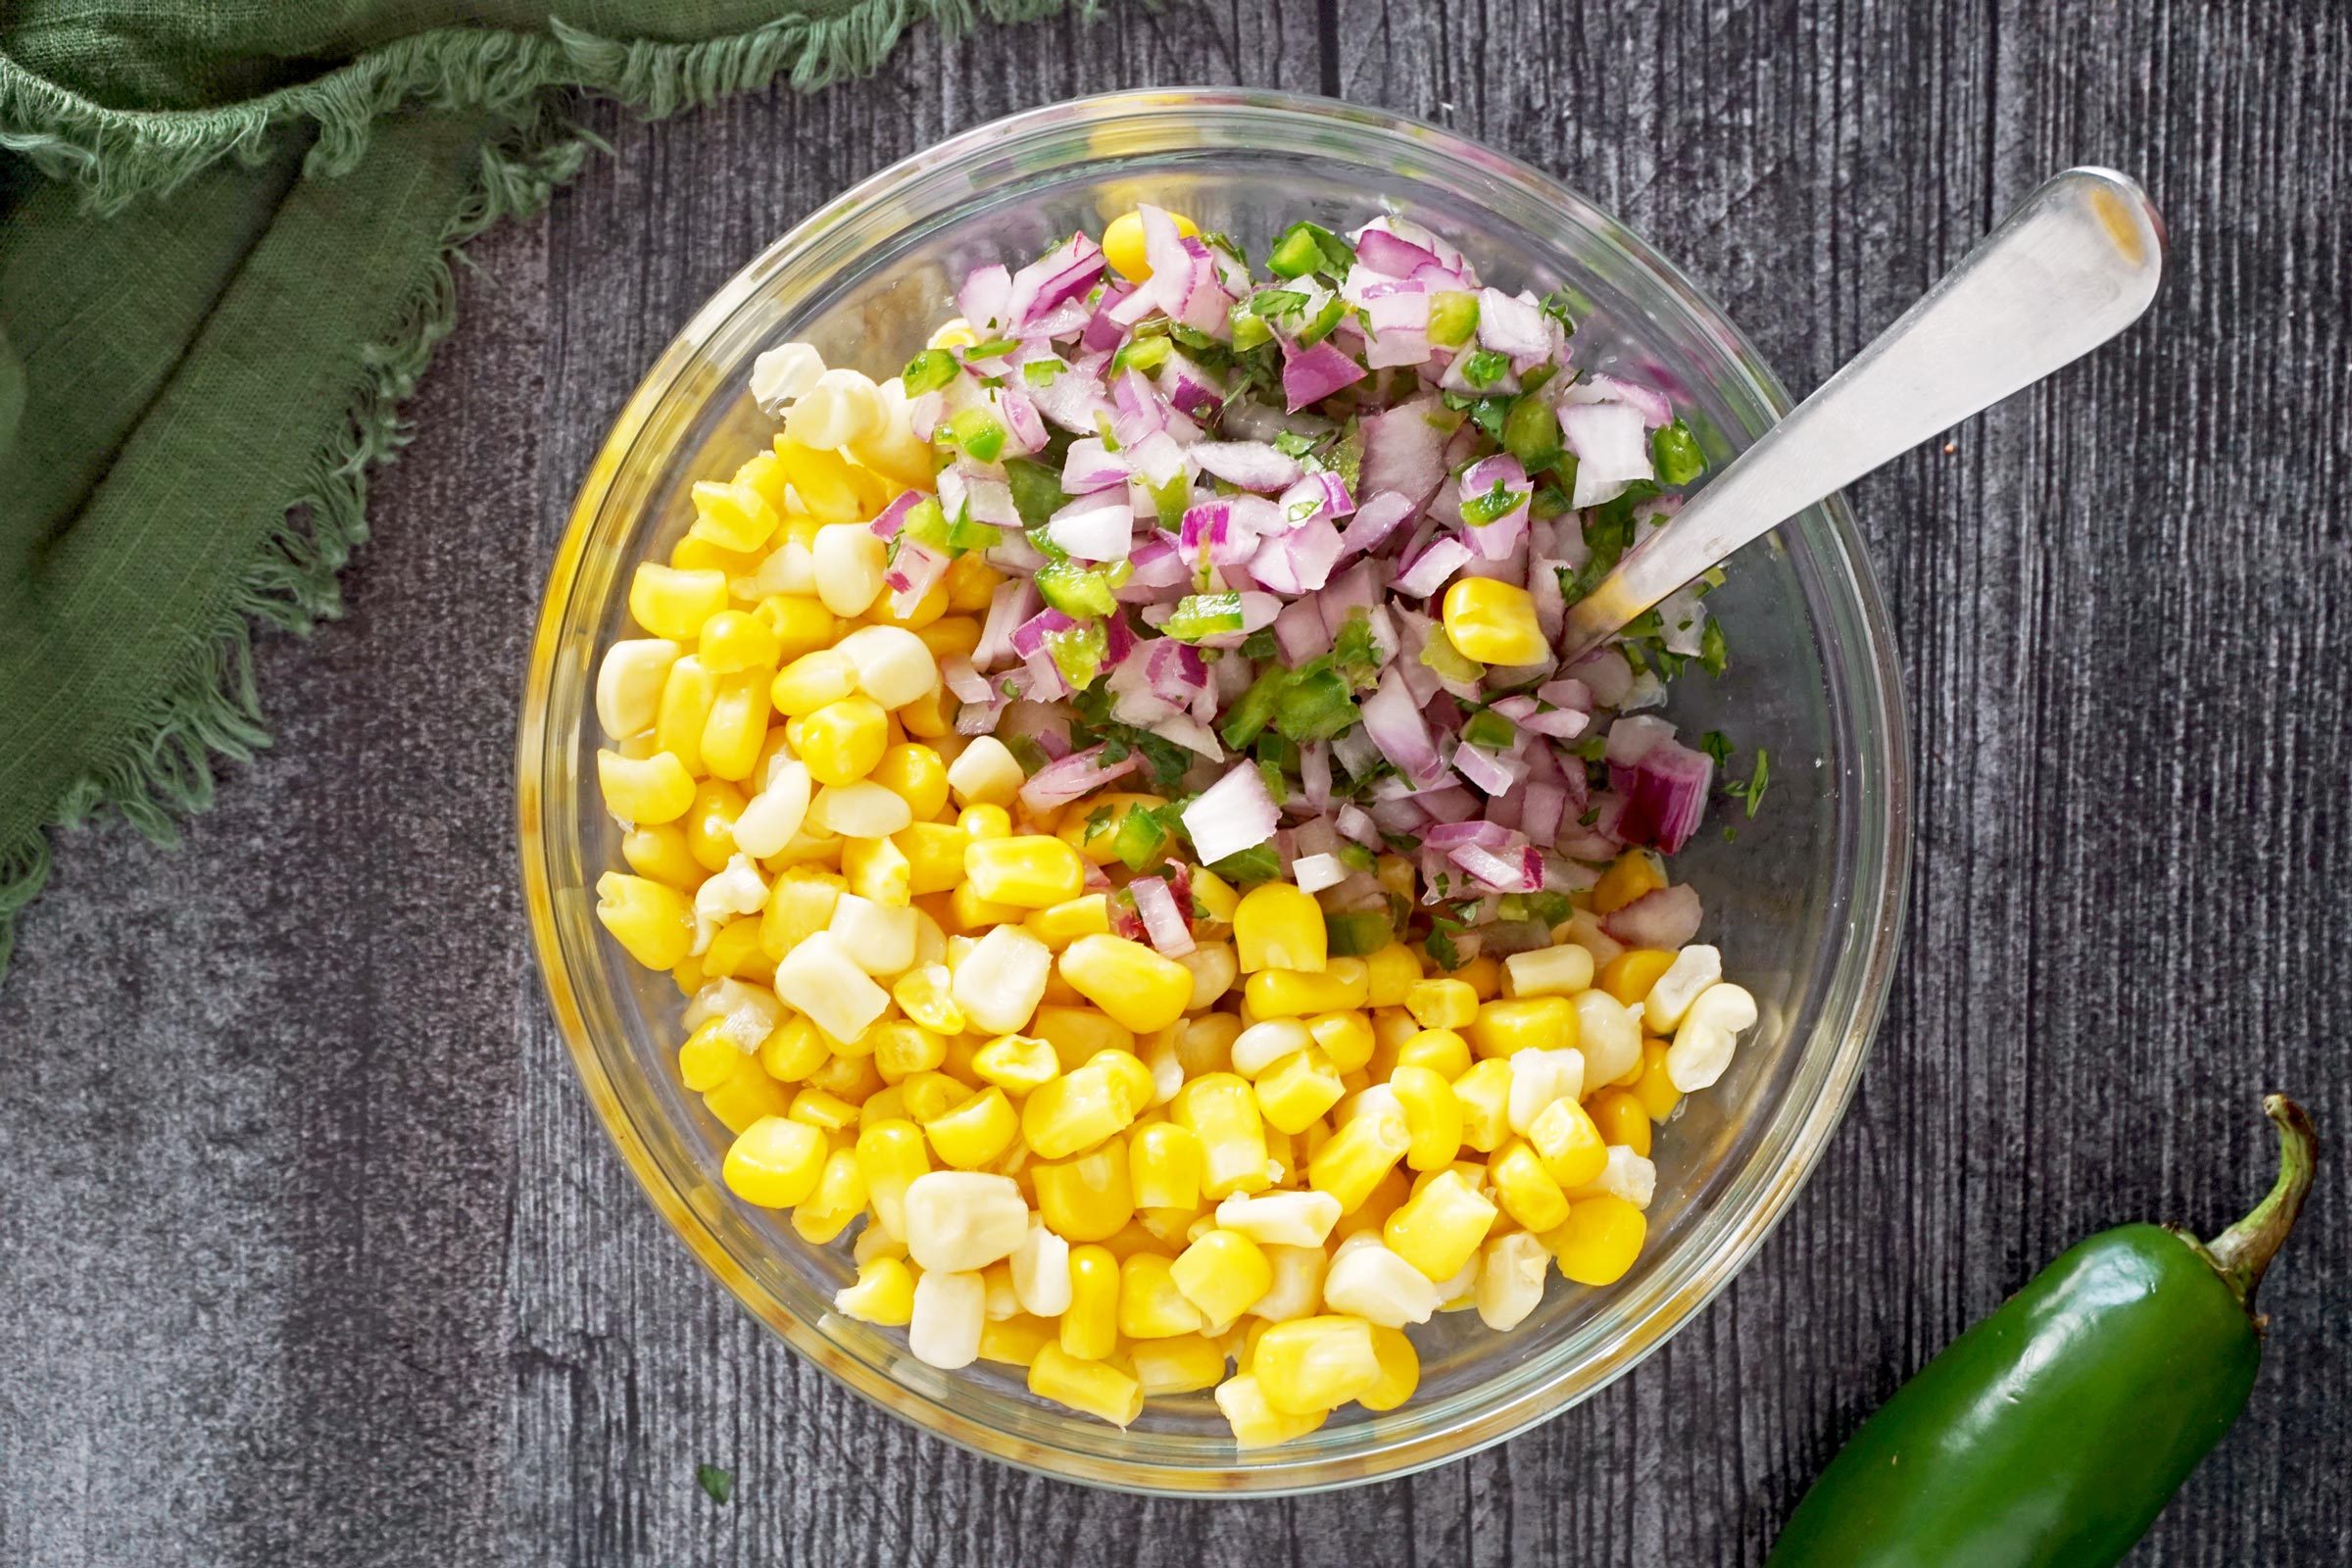 corn getting mixed with onions, peppers and herbs in a clear glass bowl